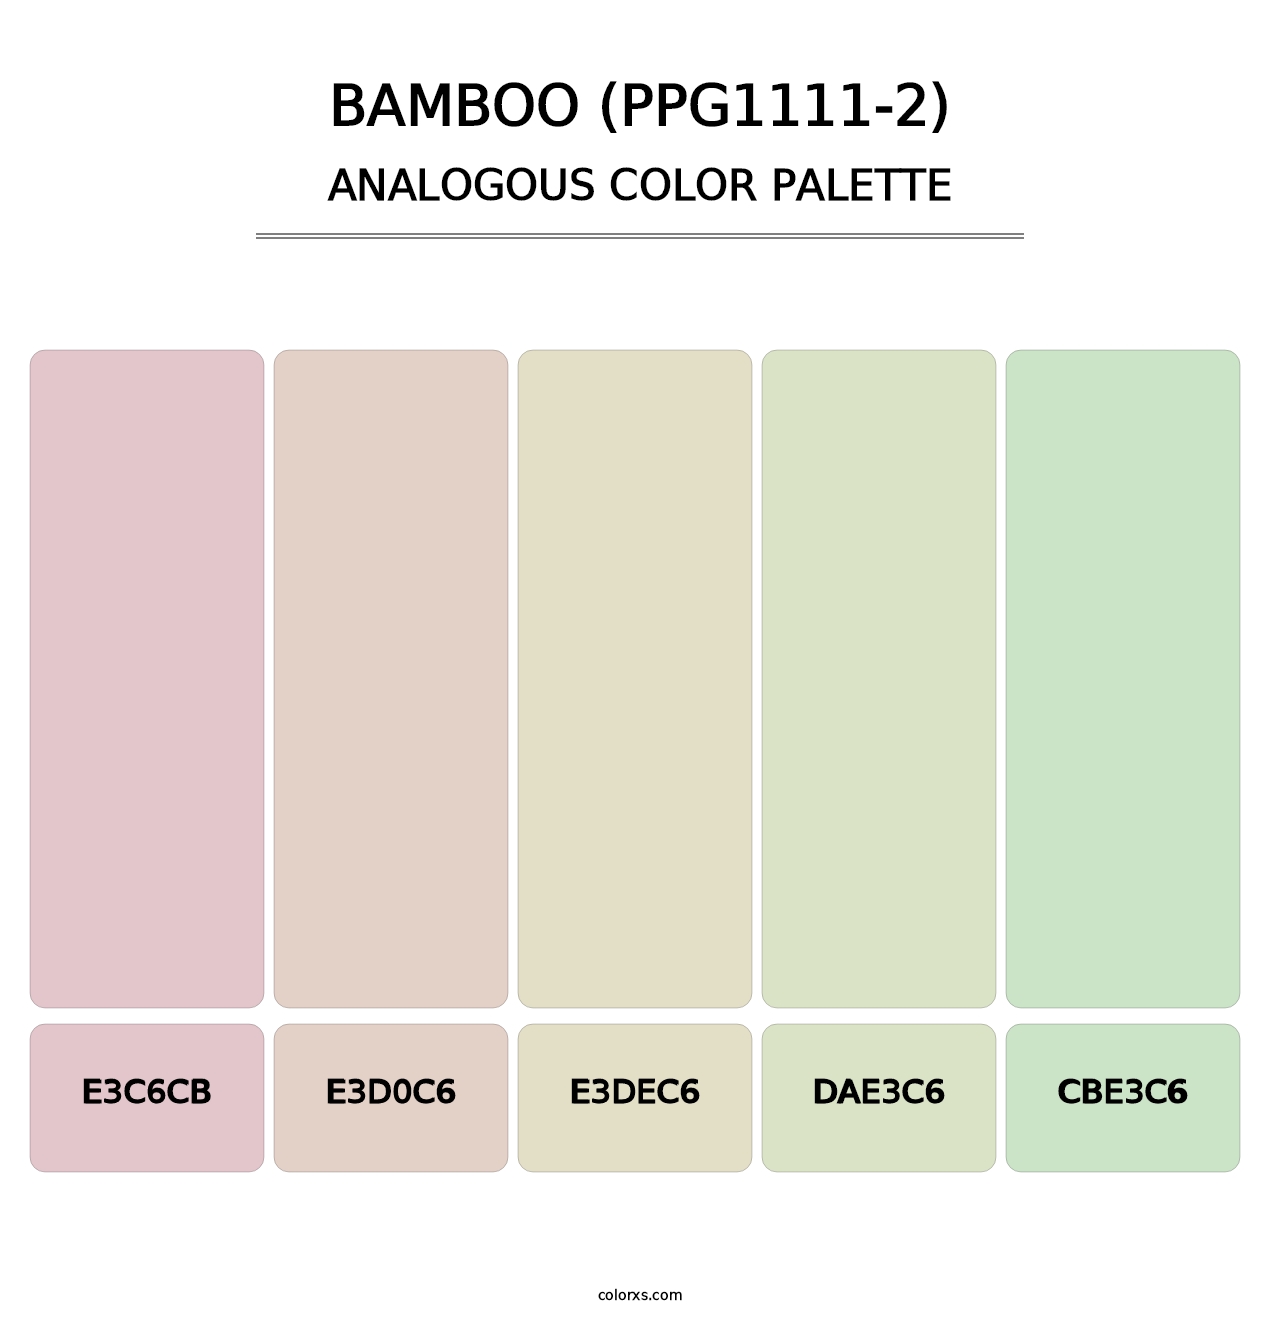 Bamboo (PPG1111-2) - Analogous Color Palette